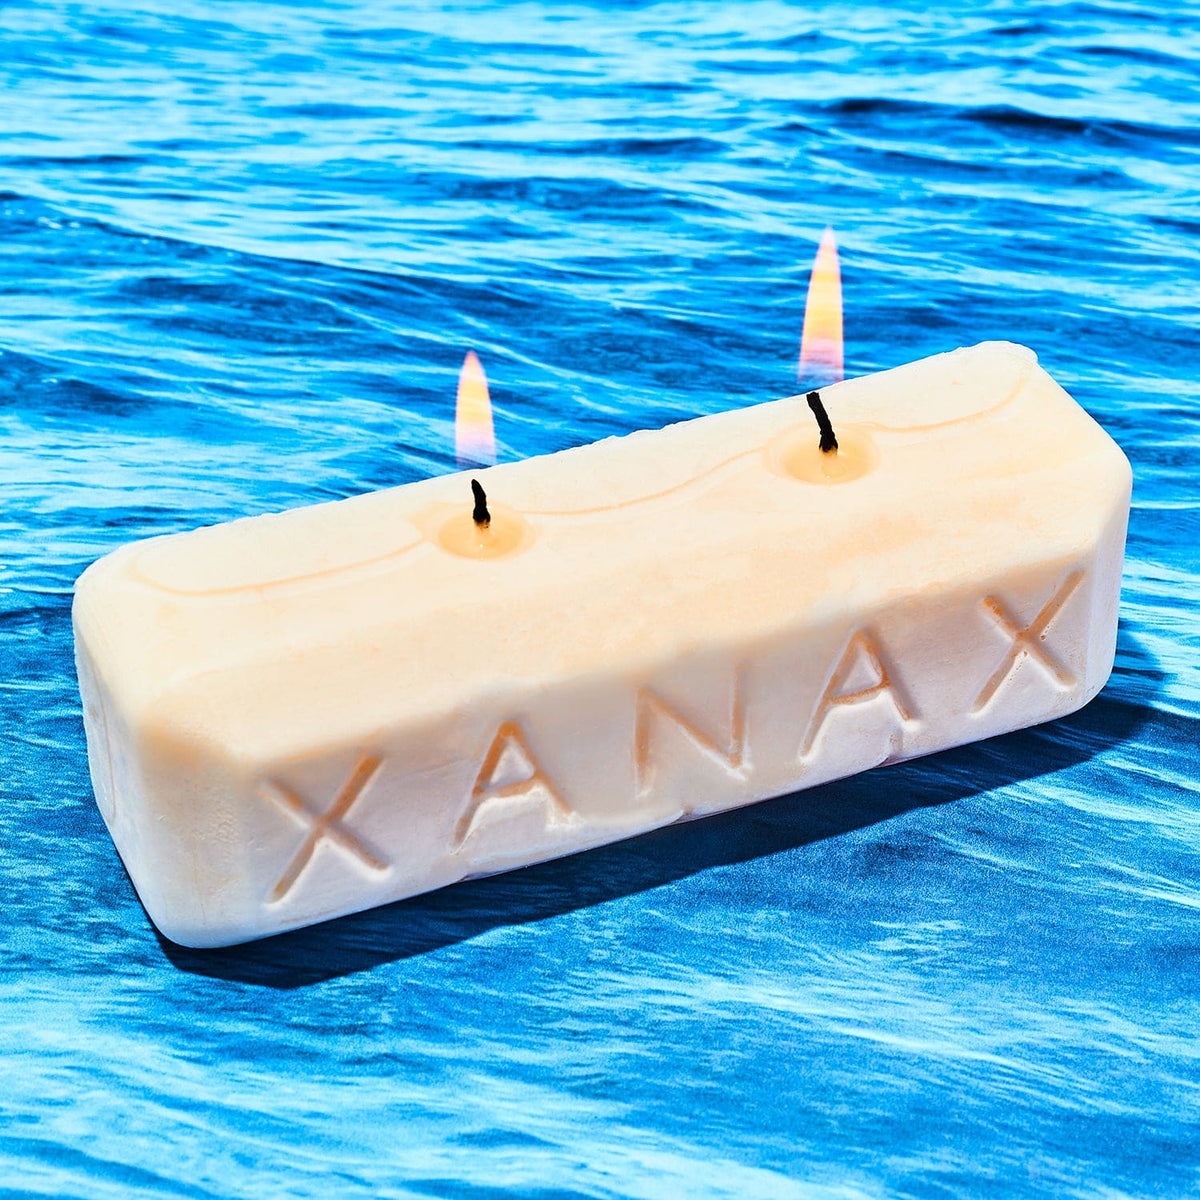 Xanax Chill Pill Candle Bff Gifts - Candle - Chill - Out -